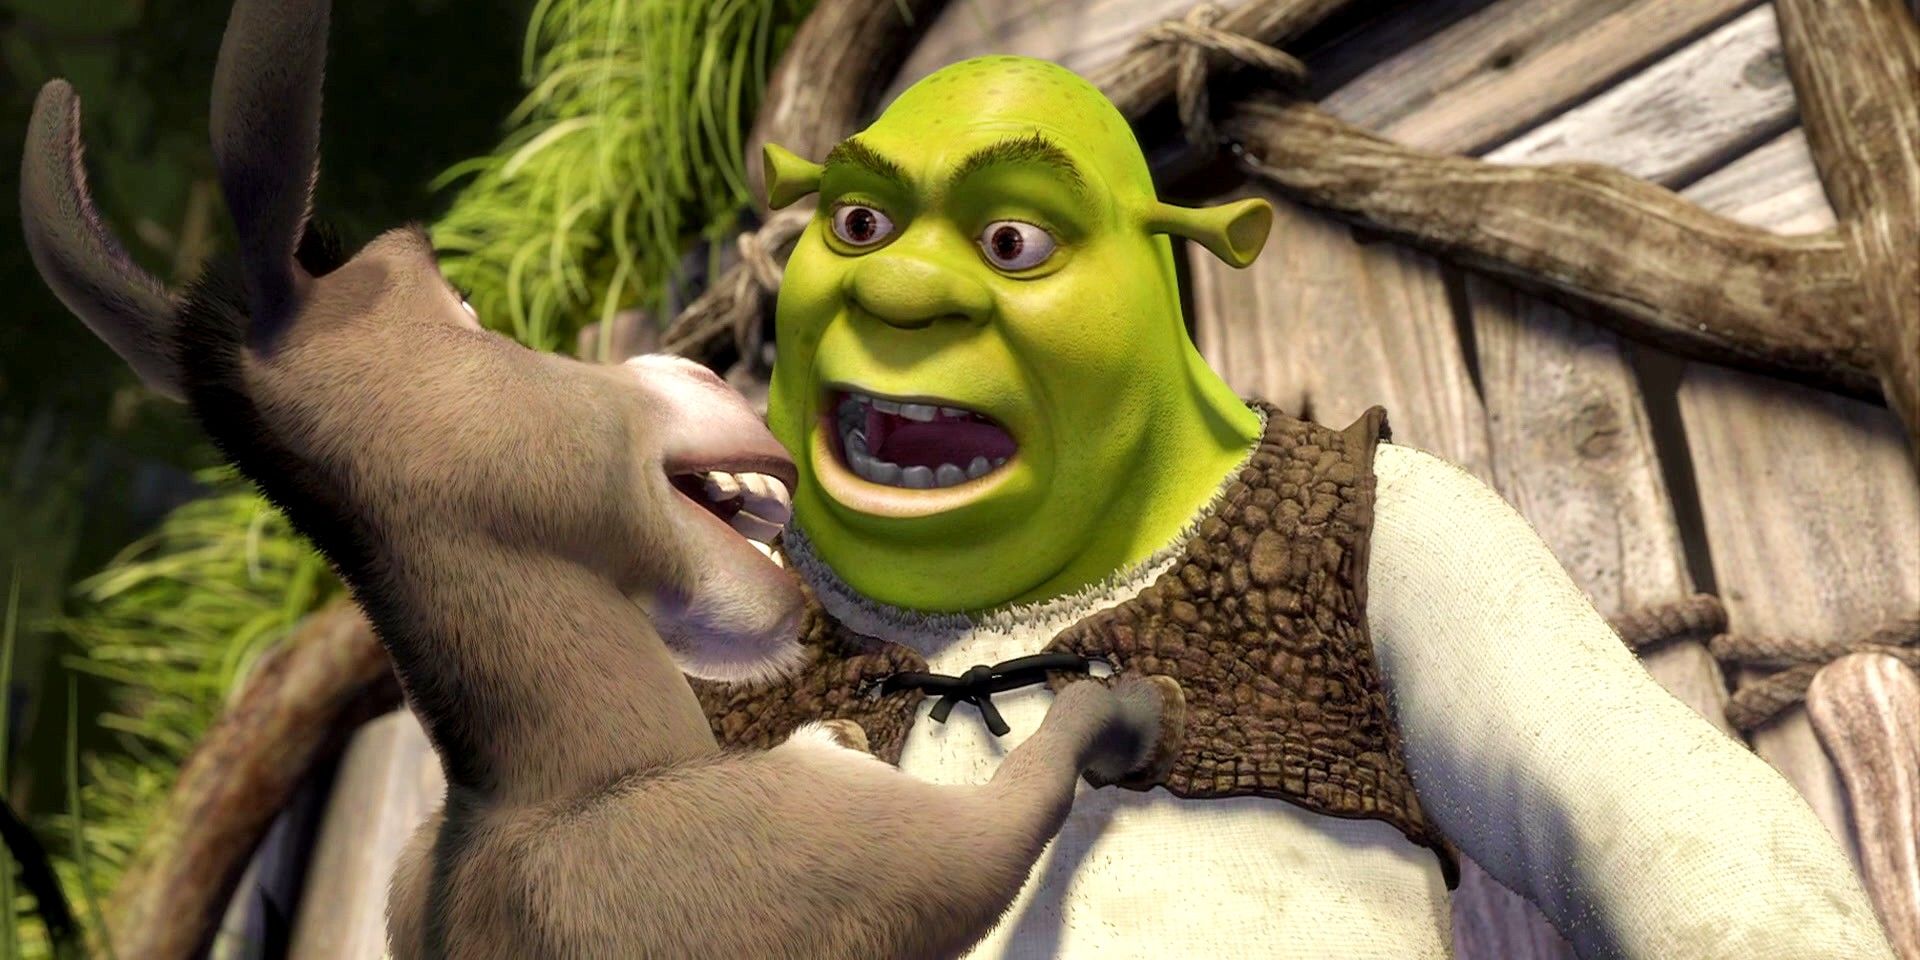 20 Years Ago, Shrek Became The First Animated Movie Franchise To Hit This Box Office Milestone